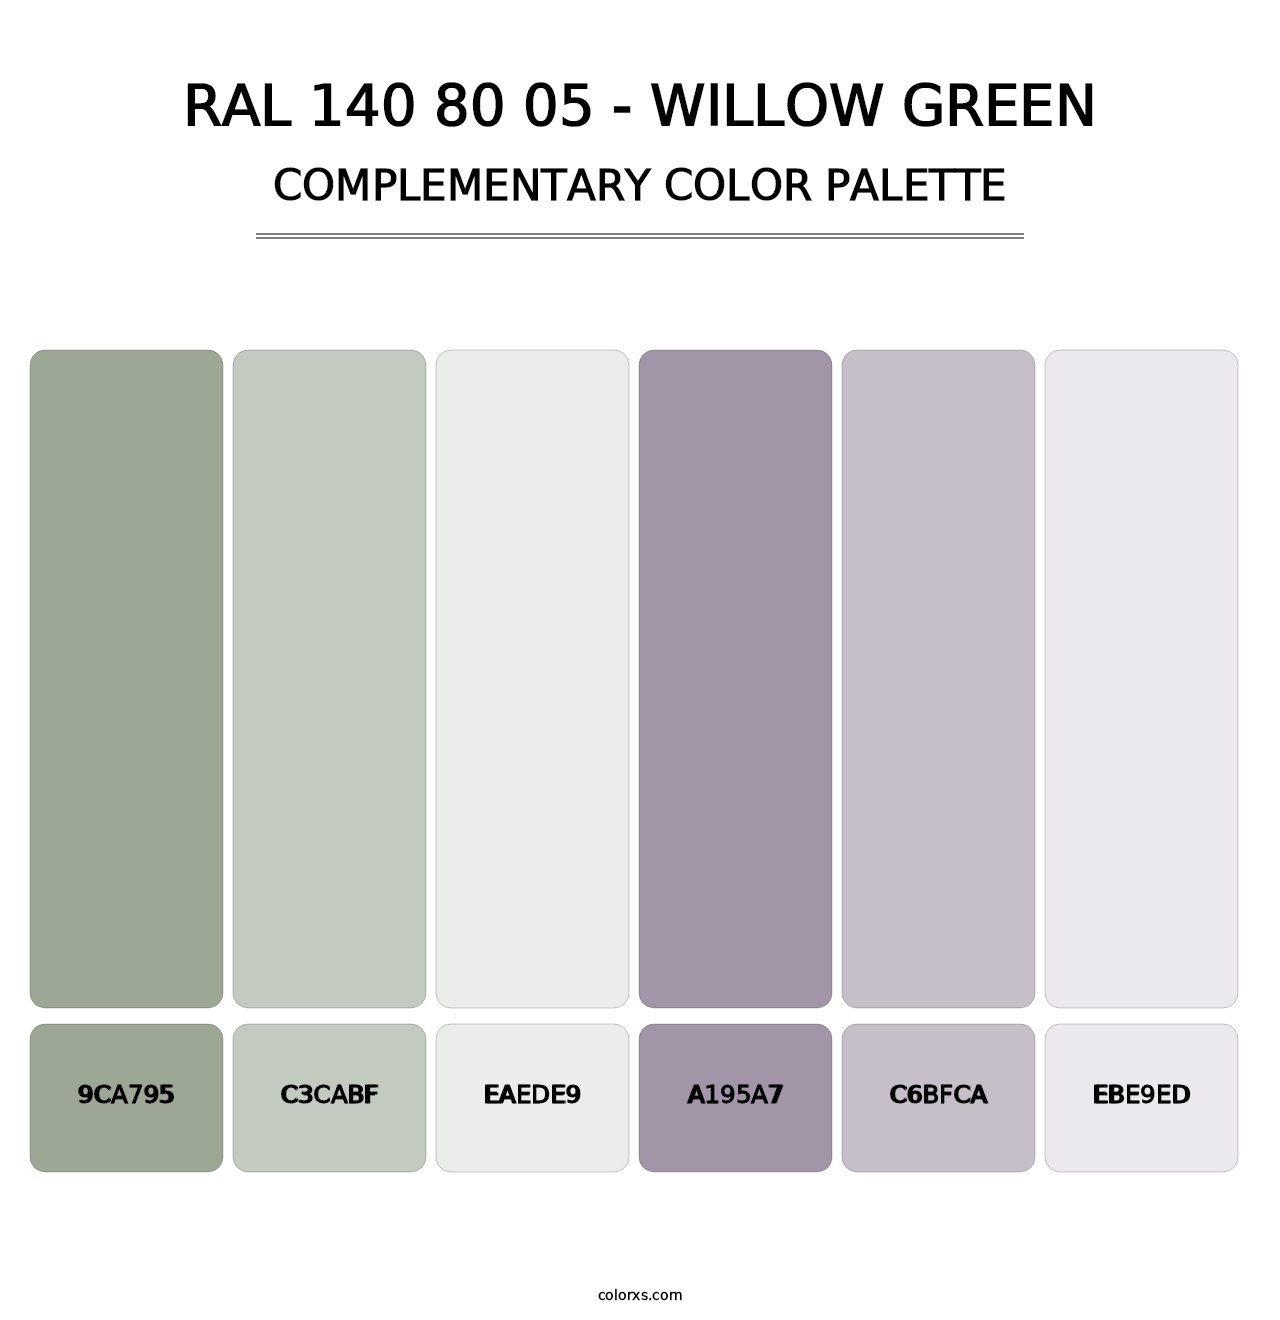 RAL 140 80 05 - Willow Green - Complementary Color Palette